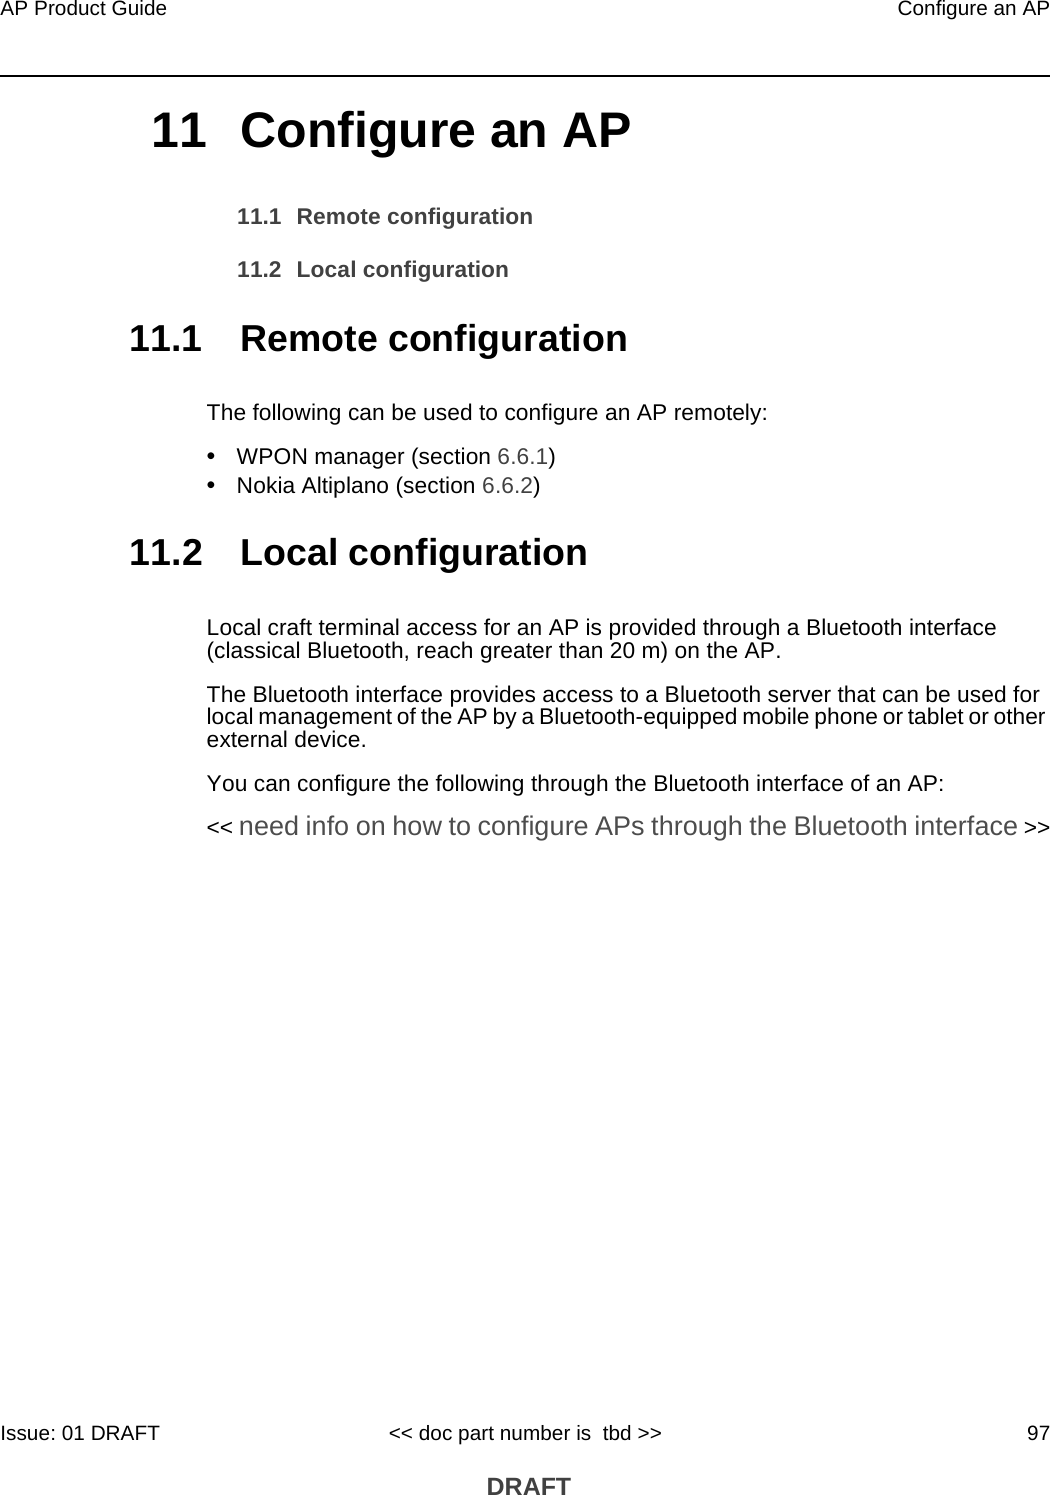 AP Product Guide Configure an APIssue: 01 DRAFT &lt;&lt; doc part number is  tbd &gt;&gt; 97 DRAFT11 Configure an AP11.1 Remote configuration11.2 Local configuration11.1 Remote configurationThe following can be used to configure an AP remotely:•WPON manager (section 6.6.1)•Nokia Altiplano (section 6.6.2)11.2 Local configurationLocal craft terminal access for an AP is provided through a Bluetooth interface (classical Bluetooth, reach greater than 20 m) on the AP.The Bluetooth interface provides access to a Bluetooth server that can be used for local management of the AP by a Bluetooth-equipped mobile phone or tablet or other external device. You can configure the following through the Bluetooth interface of an AP:&lt;&lt; need info on how to configure APs through the Bluetooth interface &gt;&gt;